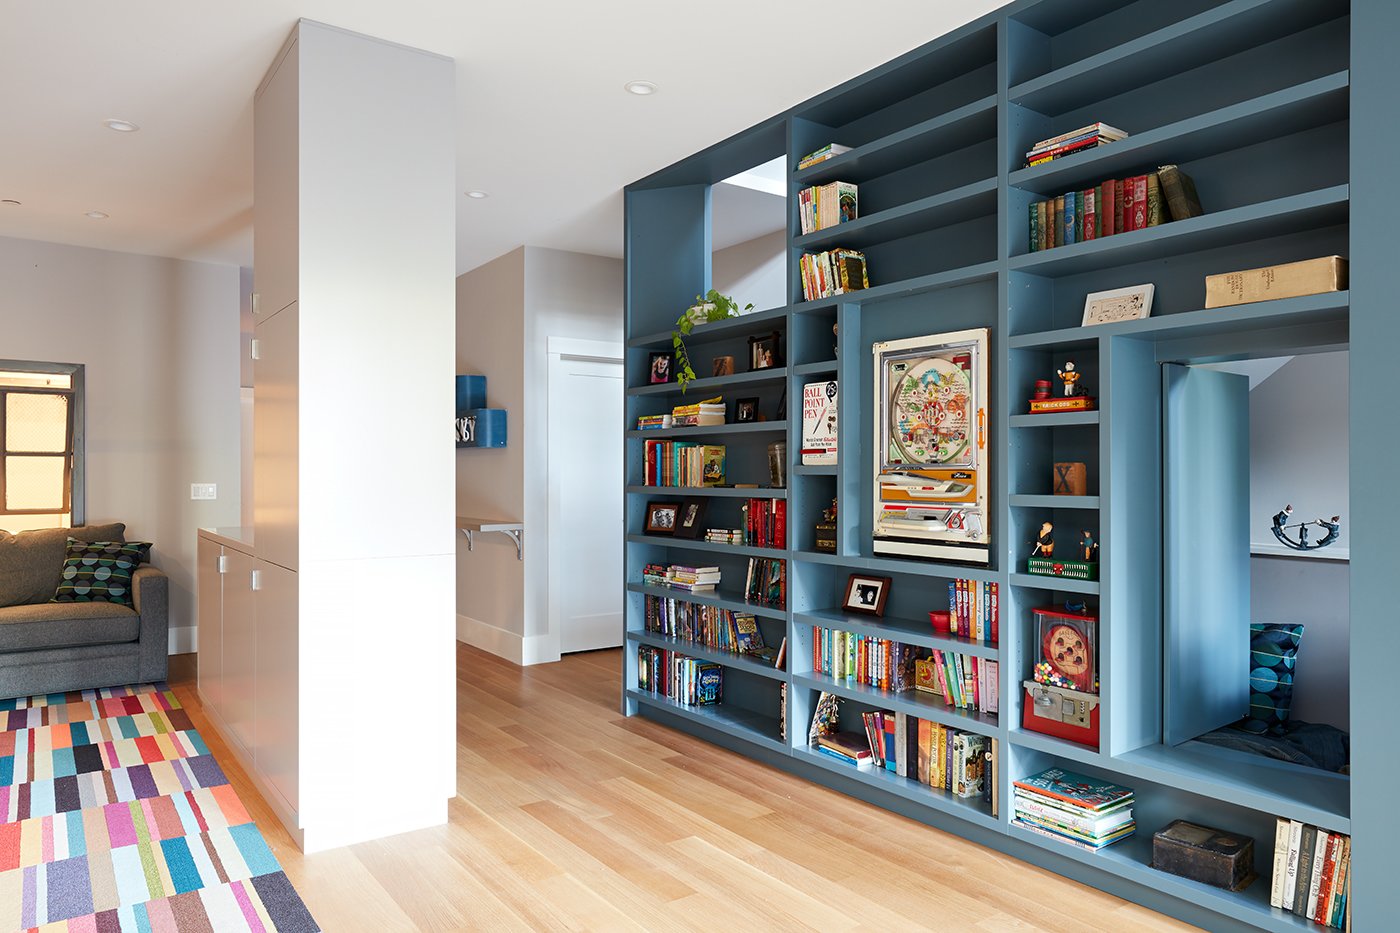 on-the-basement-level-the-megacabinet-shelving-is-mainly-used-for-books-and-toys-the-floors-throughout-the-home-are-engineered-white-oak